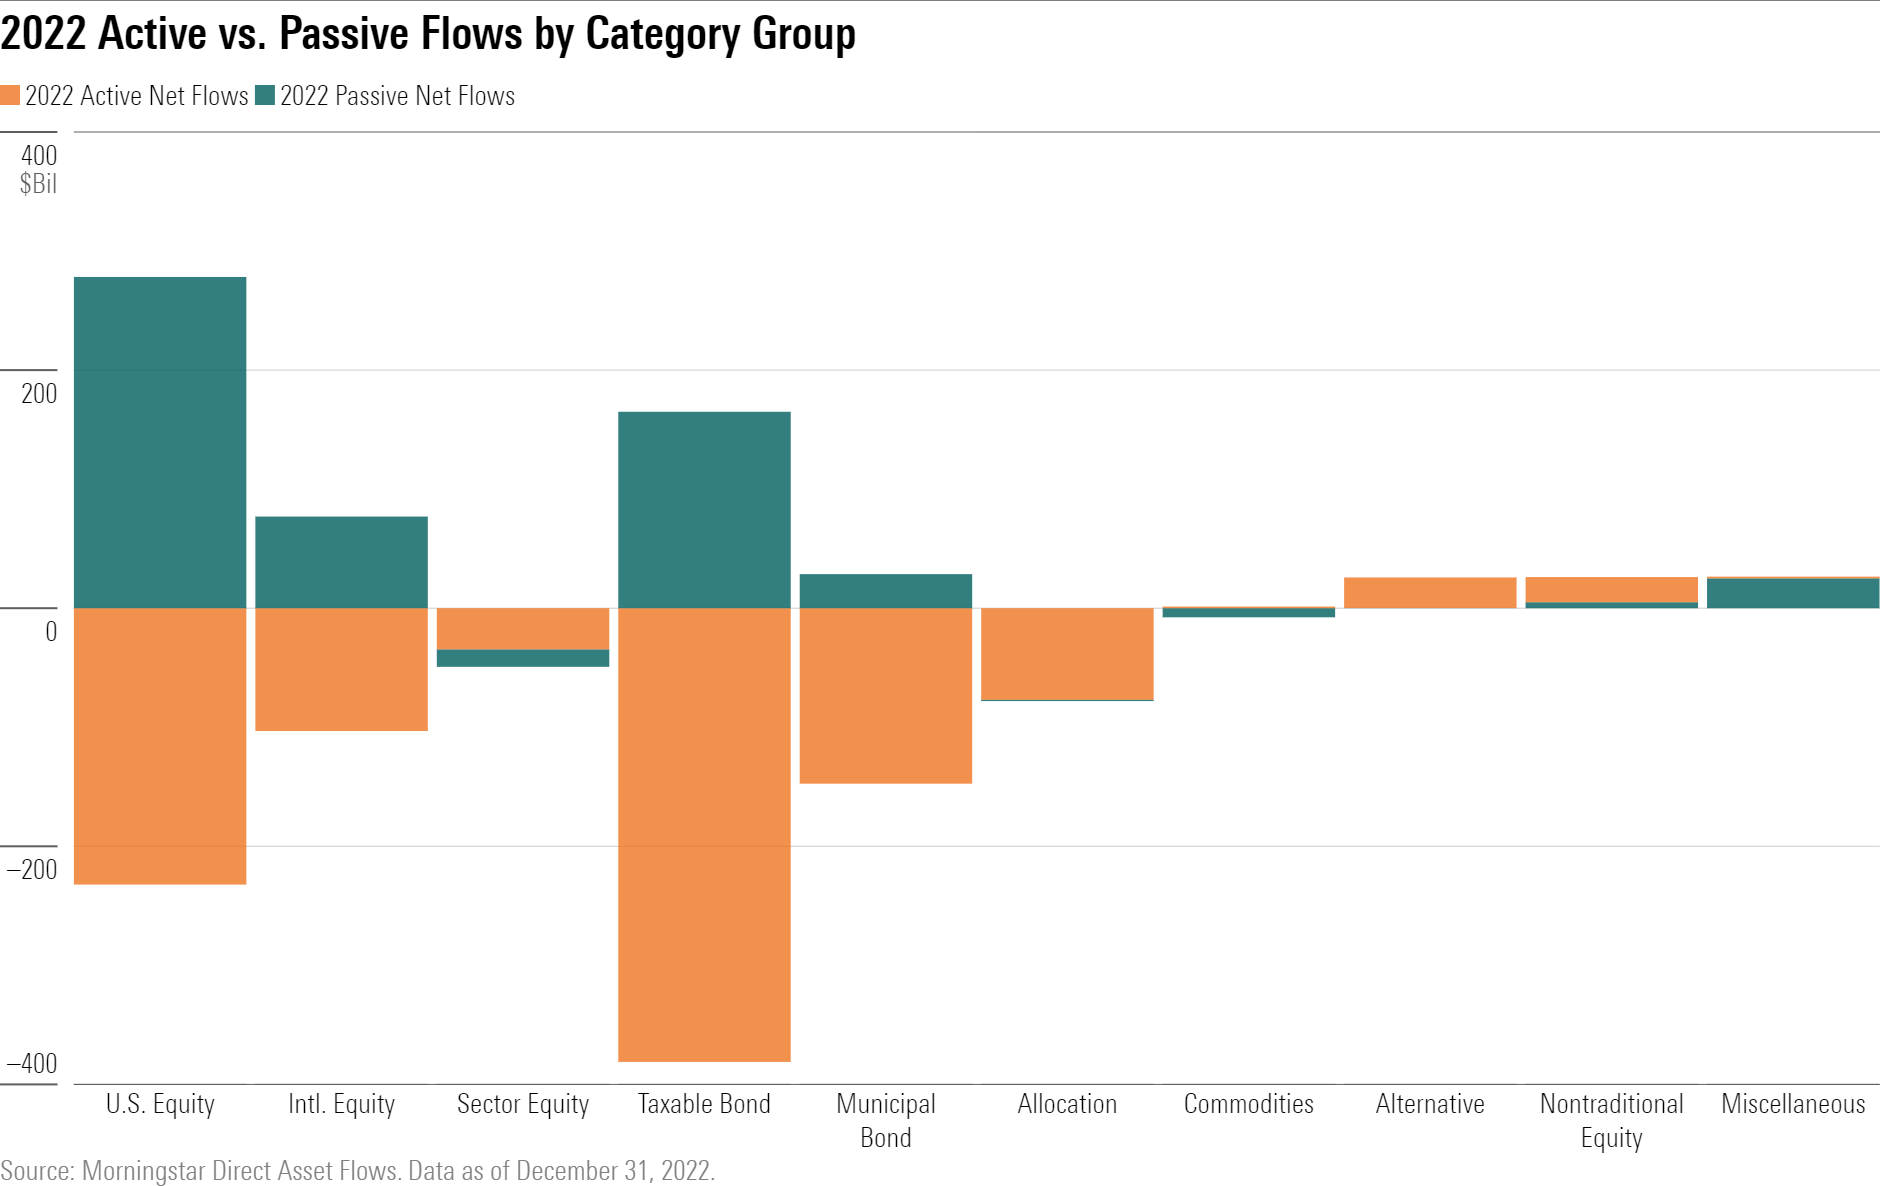 The bar chart shows 2022 net flows by category group, separated by active and passive funds.